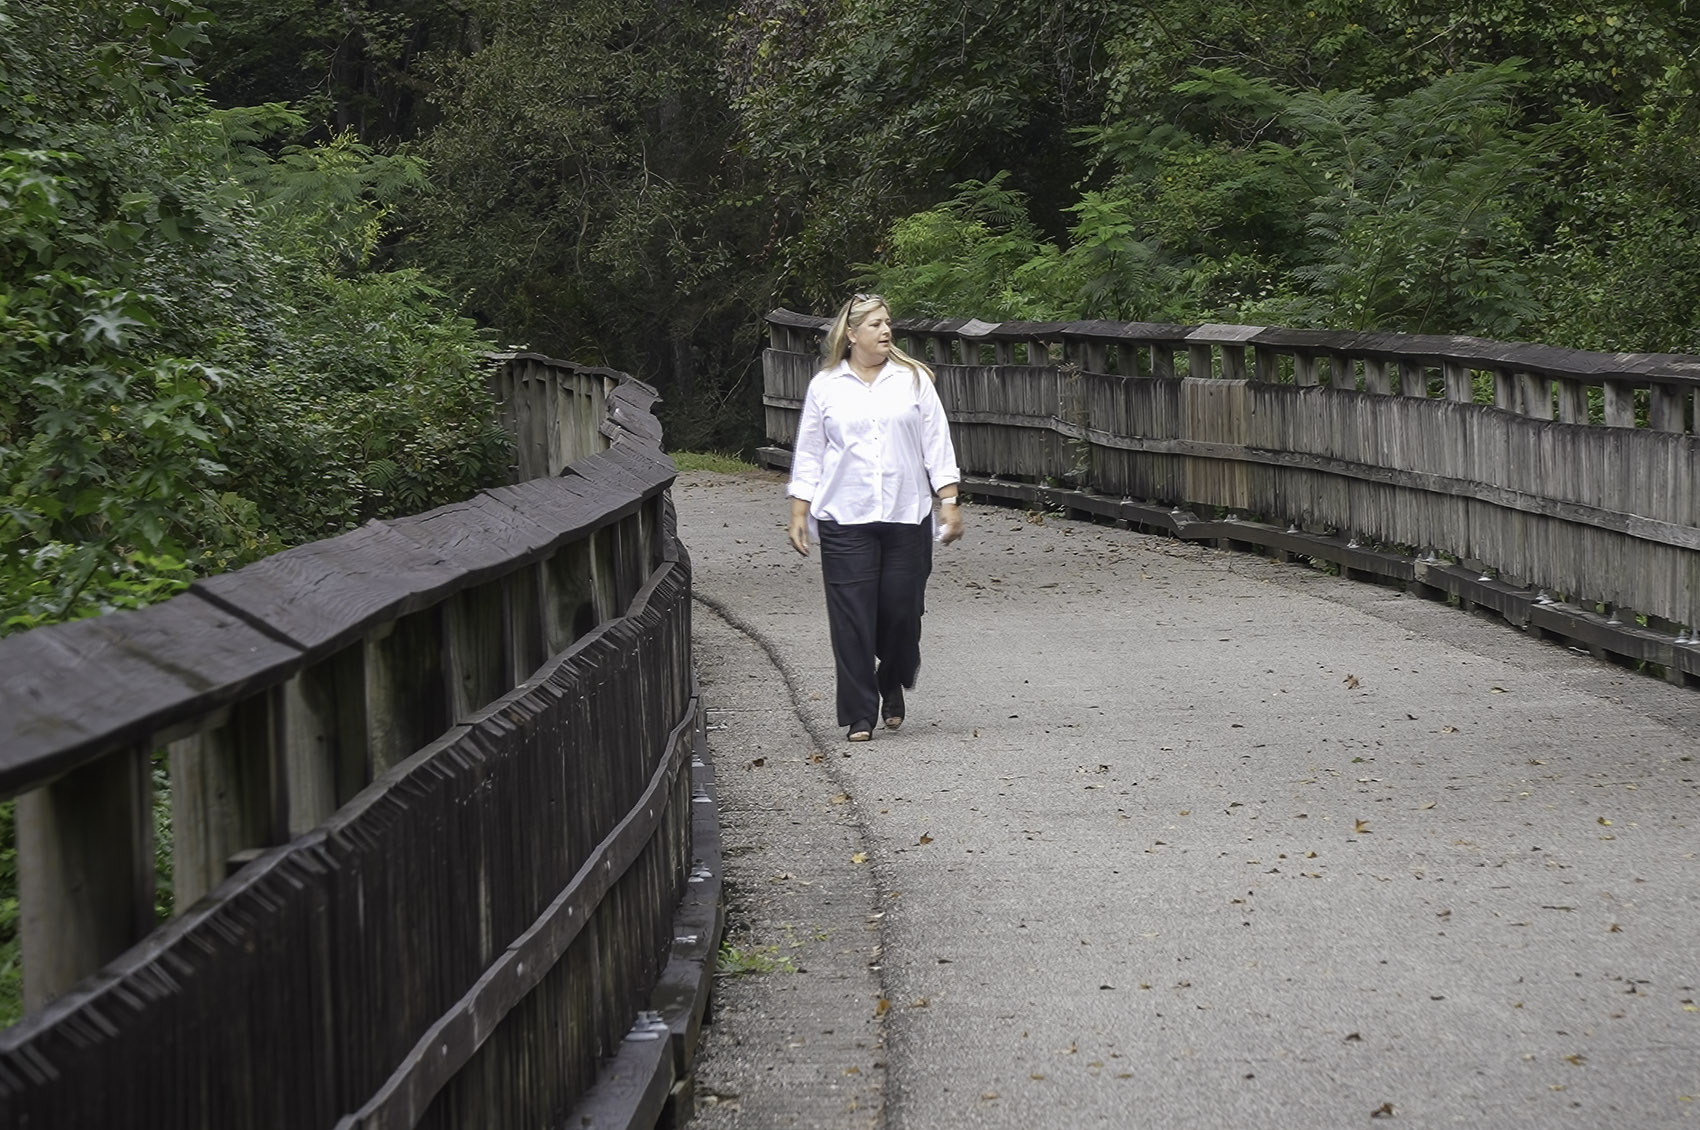 woman with blond hair, white shirt and black pants walks along footbridge in forest